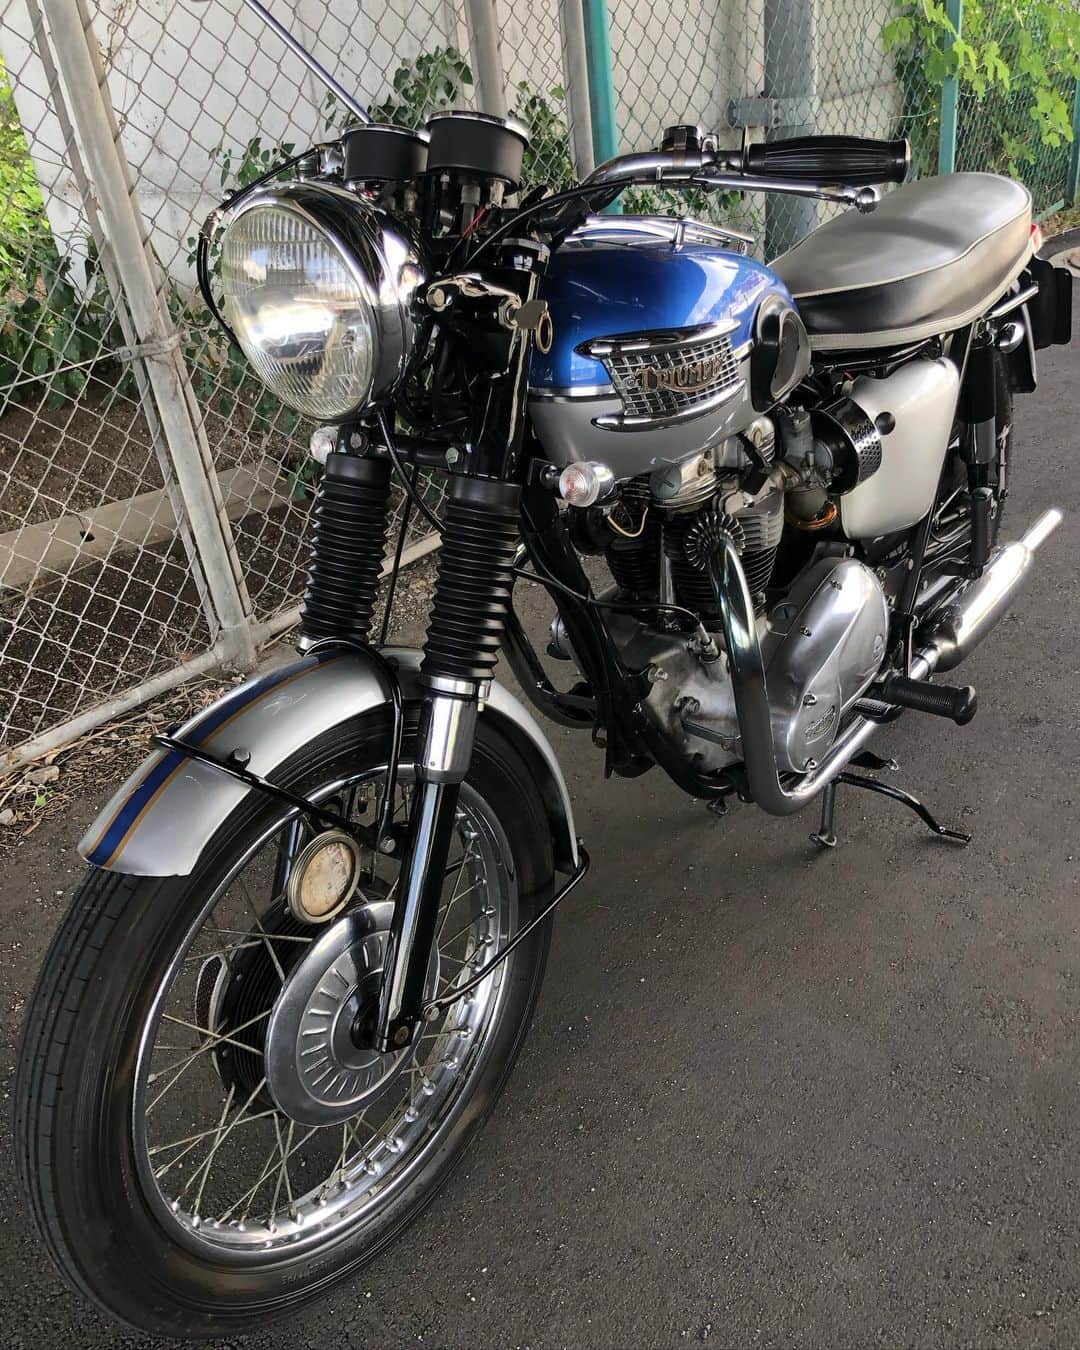 KIYOのインスタグラム：「久しぶりにボニーで出ました✨   #bestmotorcycleintheworld #triumph #t120 #bonneville #bonnie #britbike #britishmotorcycles #classicmotorcycles #lewisleathers #madeinengland #rockers  #caferacer #tonupboys #triumphmotorcycles #vintagetriumph #oldtriumph #oldtriumphsneverdie #バイクメーン #ボニー #トライアンフ #ボンネビル #ロッカーズ #カフェレーサー #ルイスレザー #ガレージライフ」